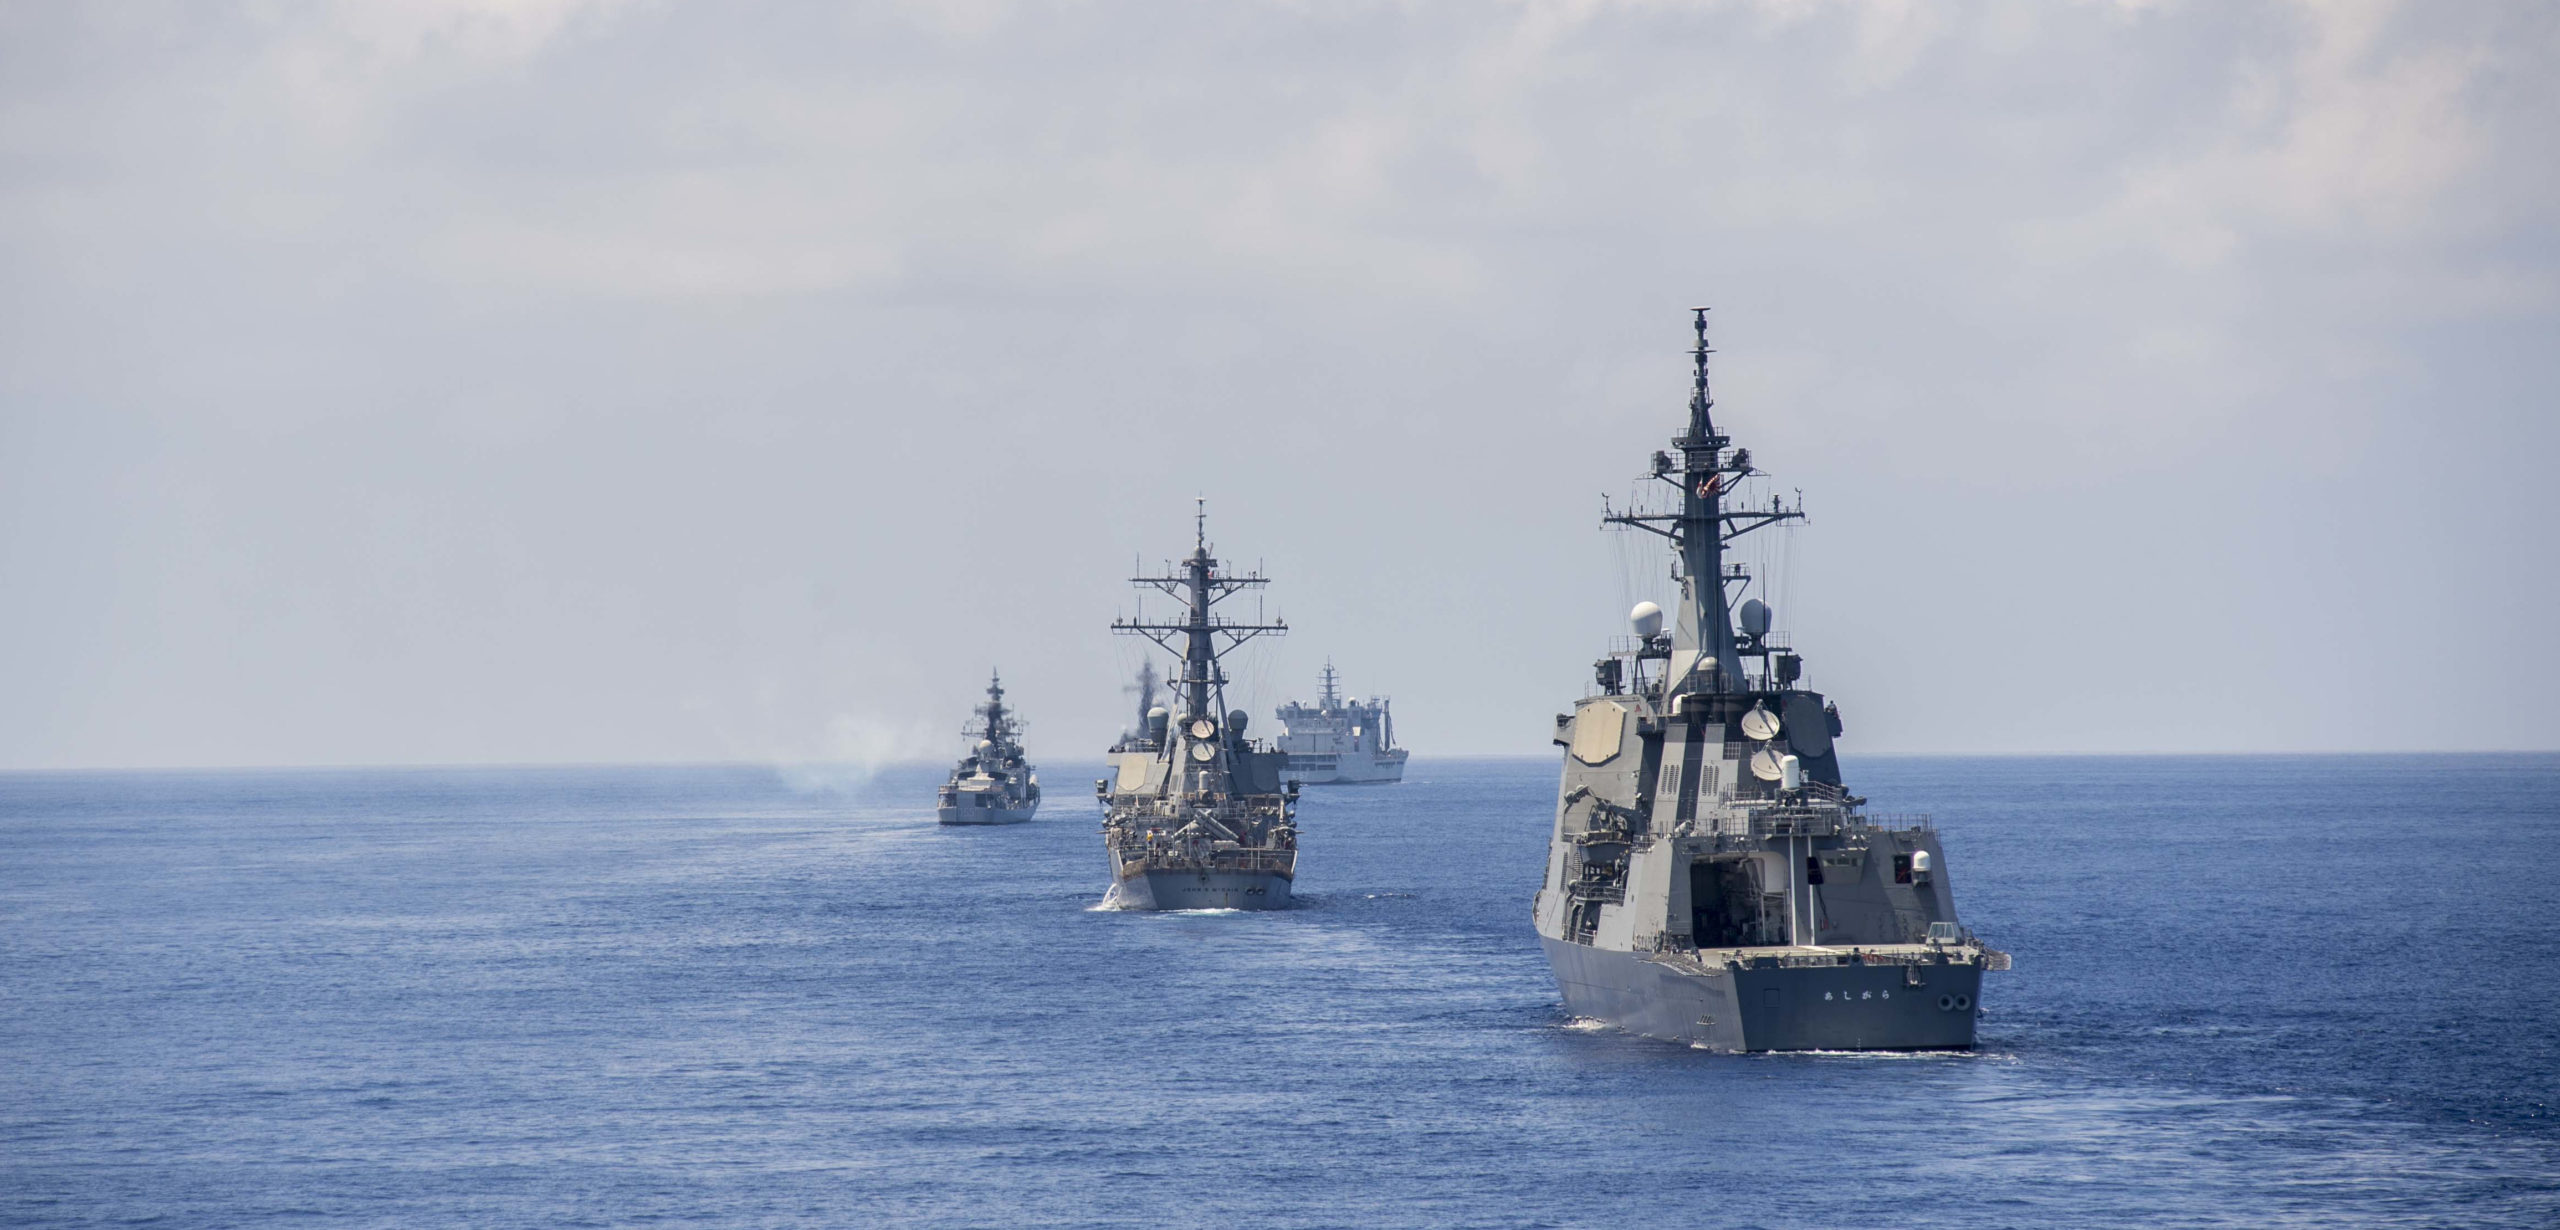 140727-N-TU910-014 EAST CHINA SEA (July 27, 2014) ) Ships assigned to Japan Maritime Self-Defense Force, Indian Navy, and U.S. Navy steam alongside Ticonderoga-class guided-missile destroyer USS Shiloh (CG 67) during Malabar 2014. Malabar 2014 is a U.S. Navy, Indian Navy, Japan Maritime Self-Defense Force trilateral naval field training exercise aimed to improve our collective maritime relationship and increase understanding in multinational operations. (U.S. Navy photo released by Mass Communication Specialist Seaman Abby Rader/Released), cc Naval Surface Warriors Flickr, modified